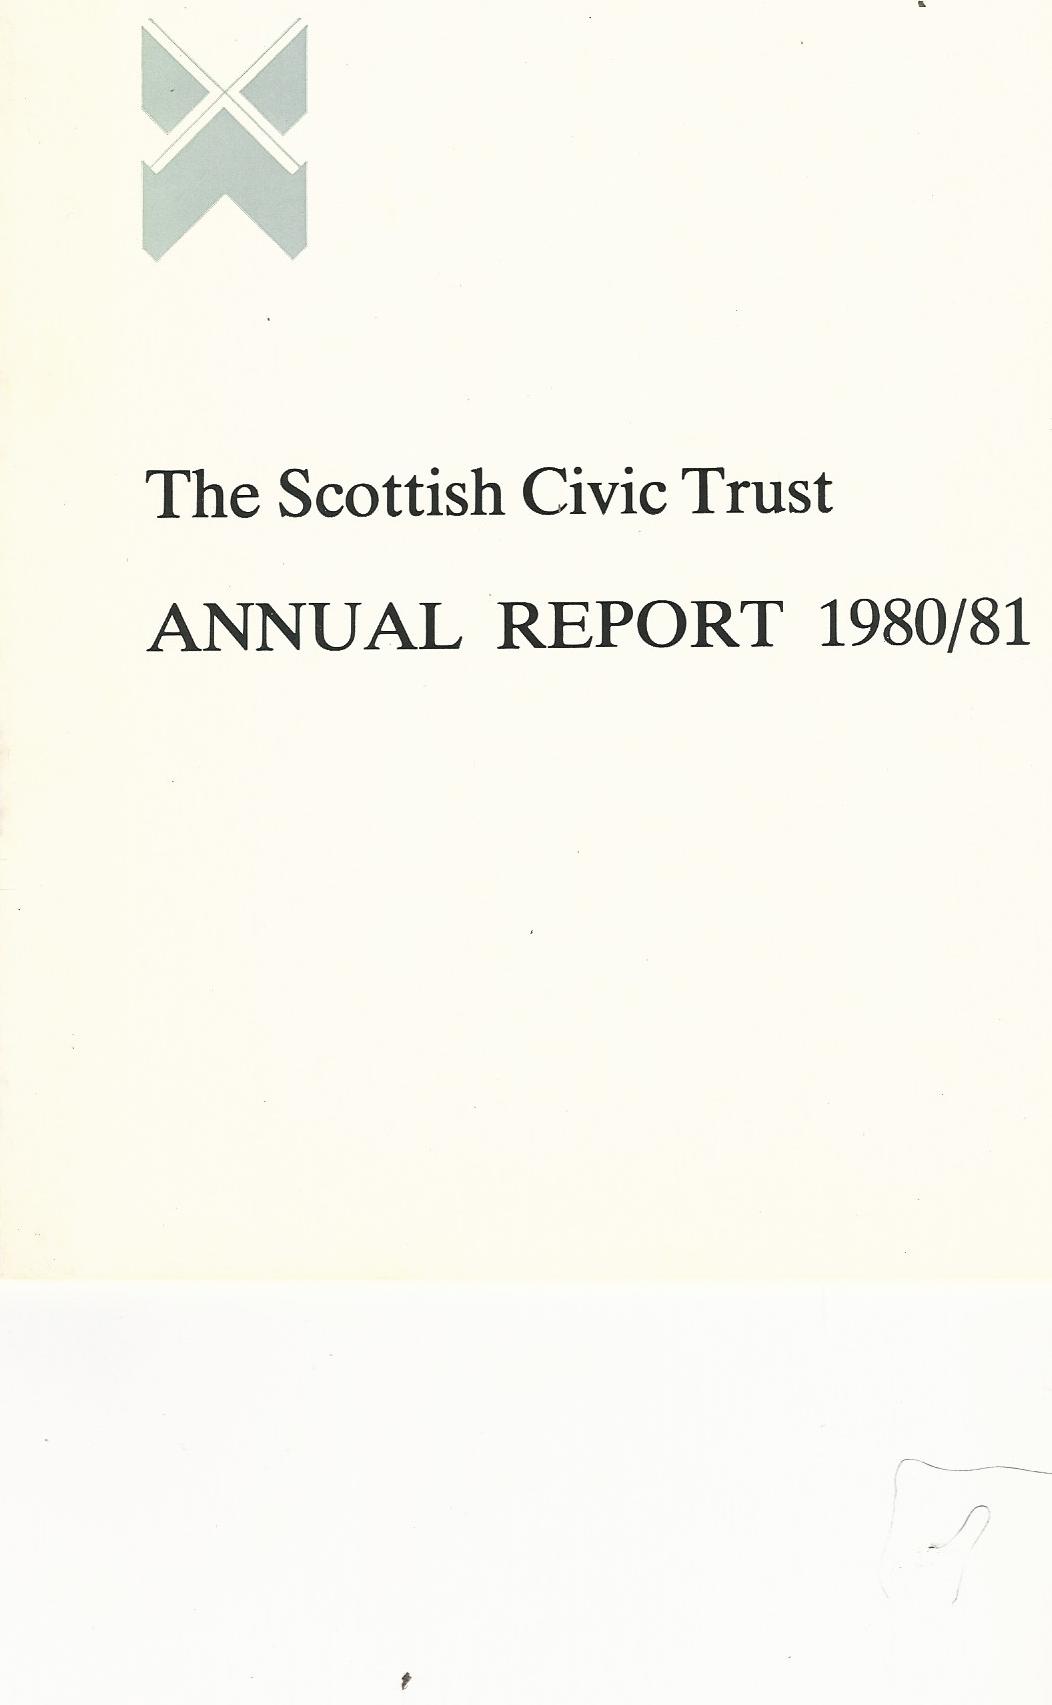 Image for The Scottish Civic Trust Annual Report 1980/81.